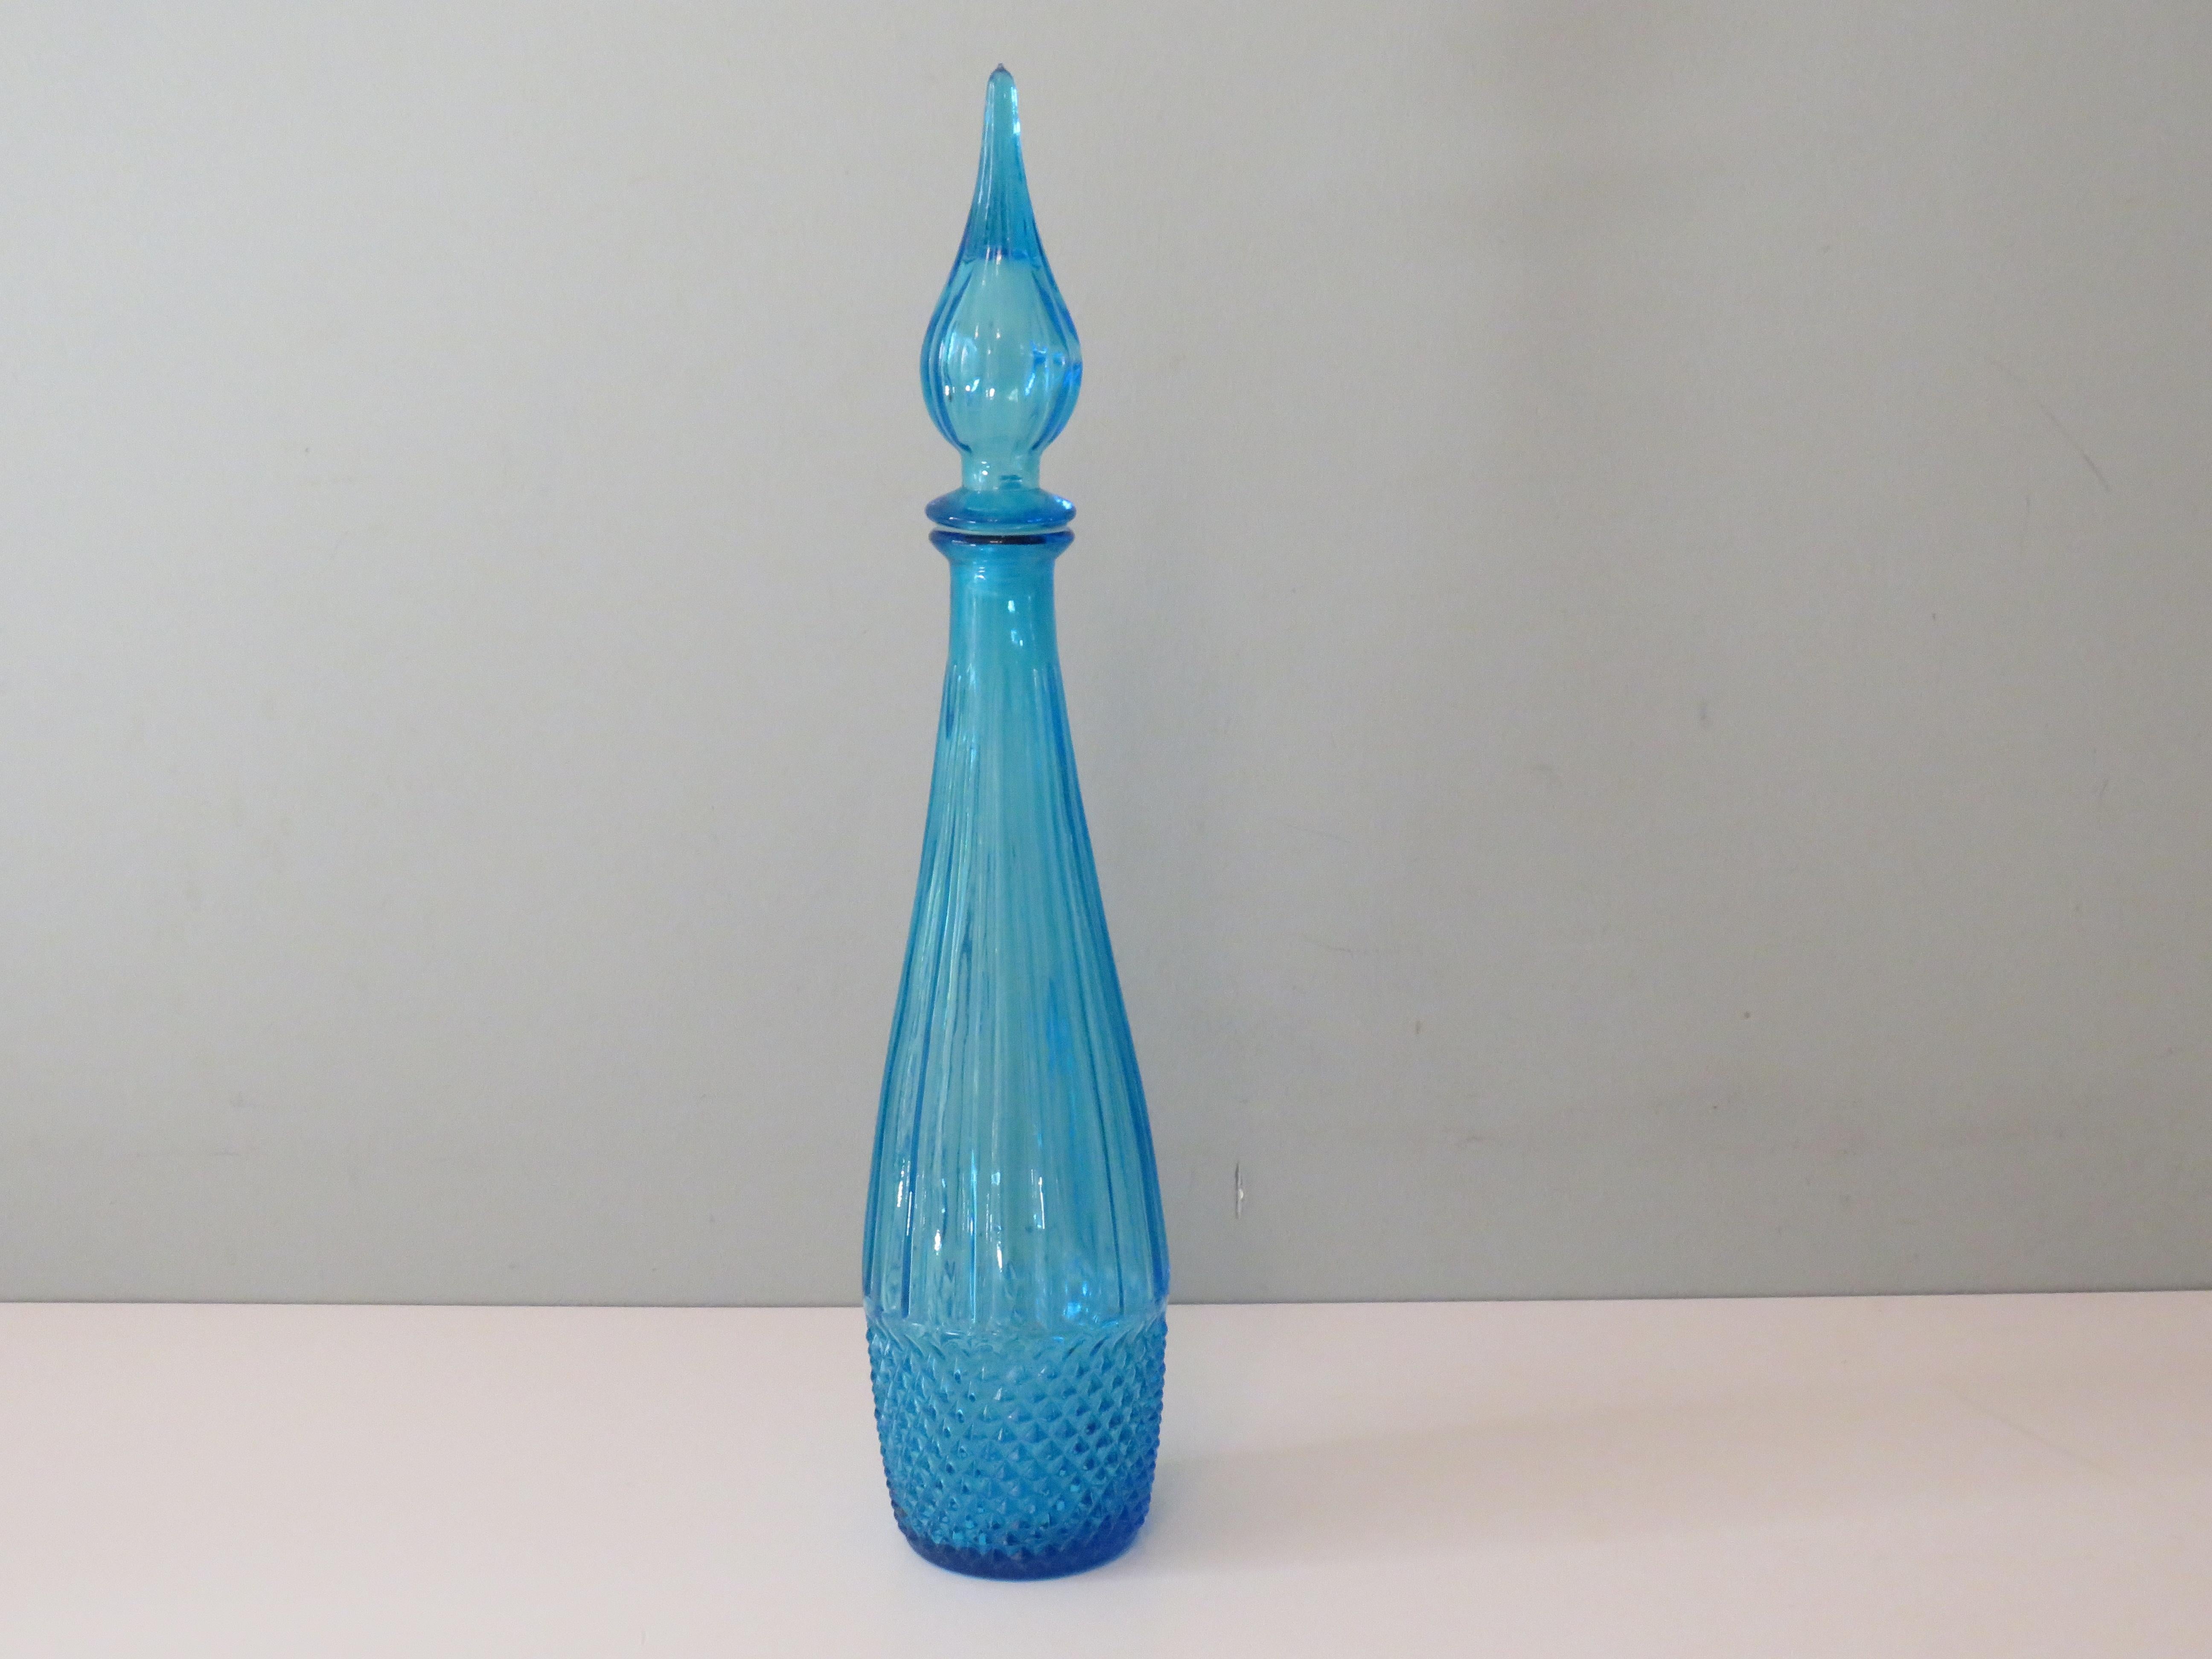 Blue Empoli bottle with stopper.
Measures: Height: 43 cm
Diameter bottom: 7 cm
The bottle is labeled and in good condition.